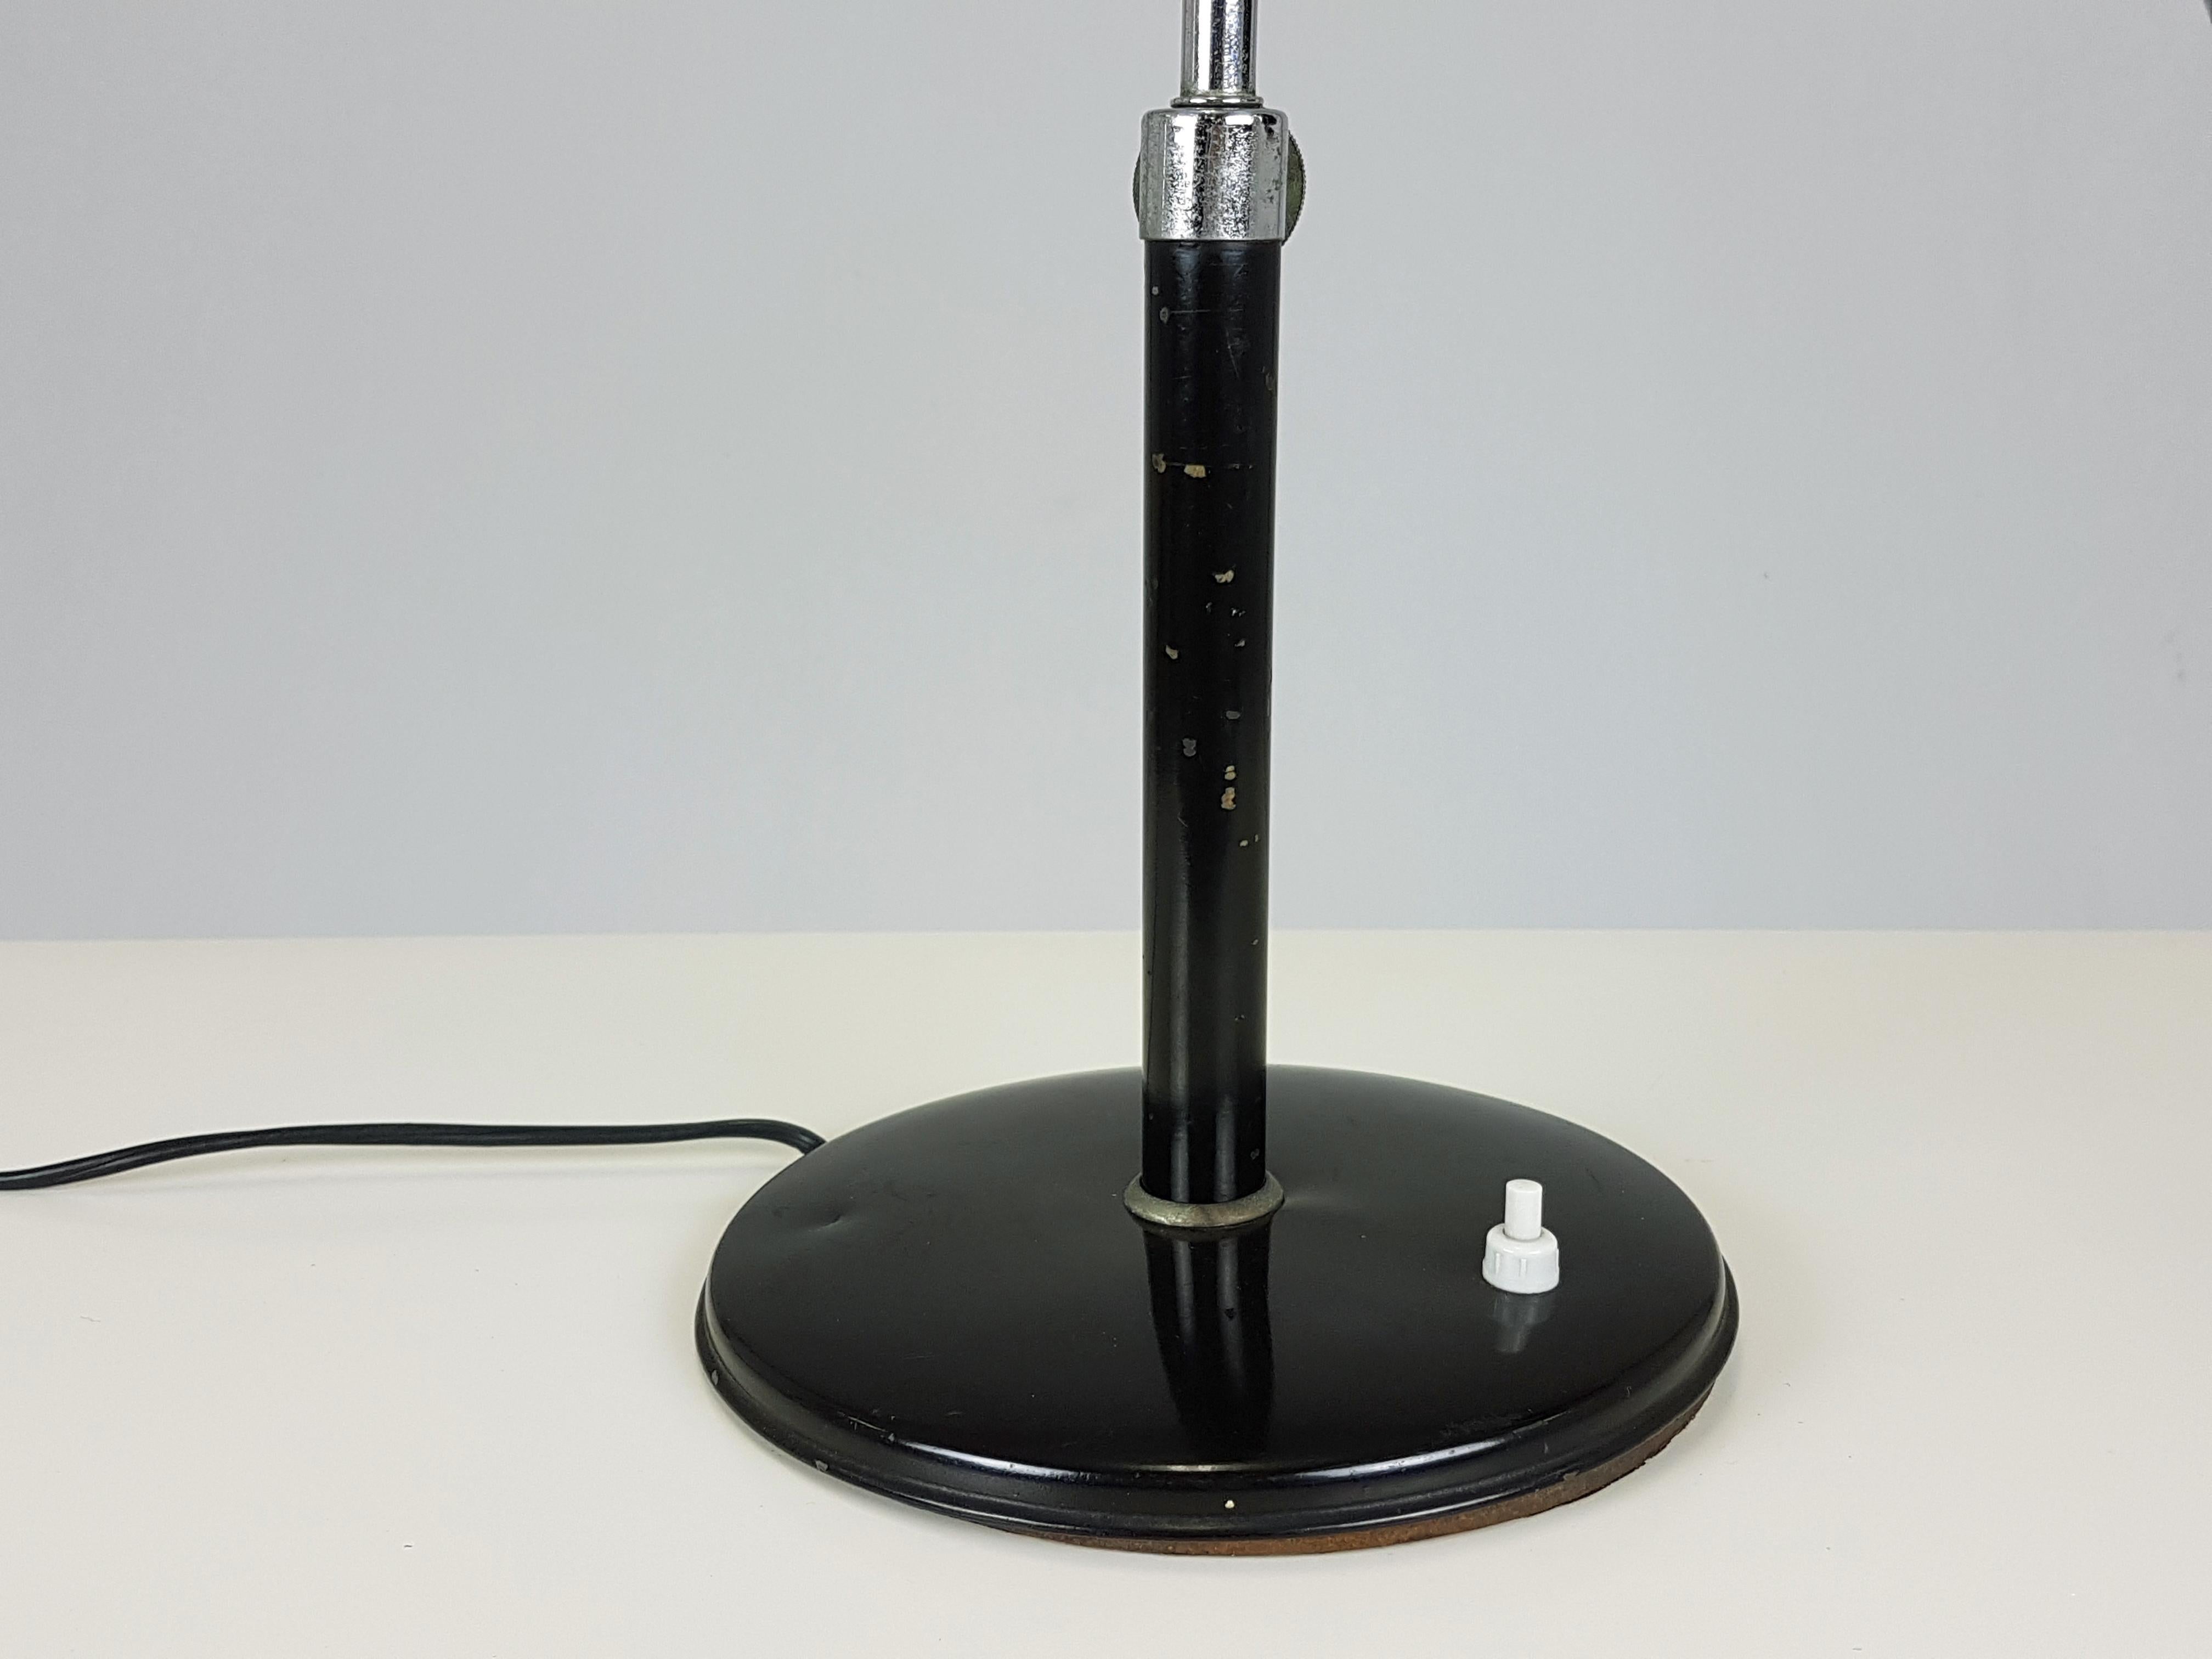 Rare Chrome Plated & Black Painted Metal Rationalist Table Lamp by I. Gardella For Sale 5